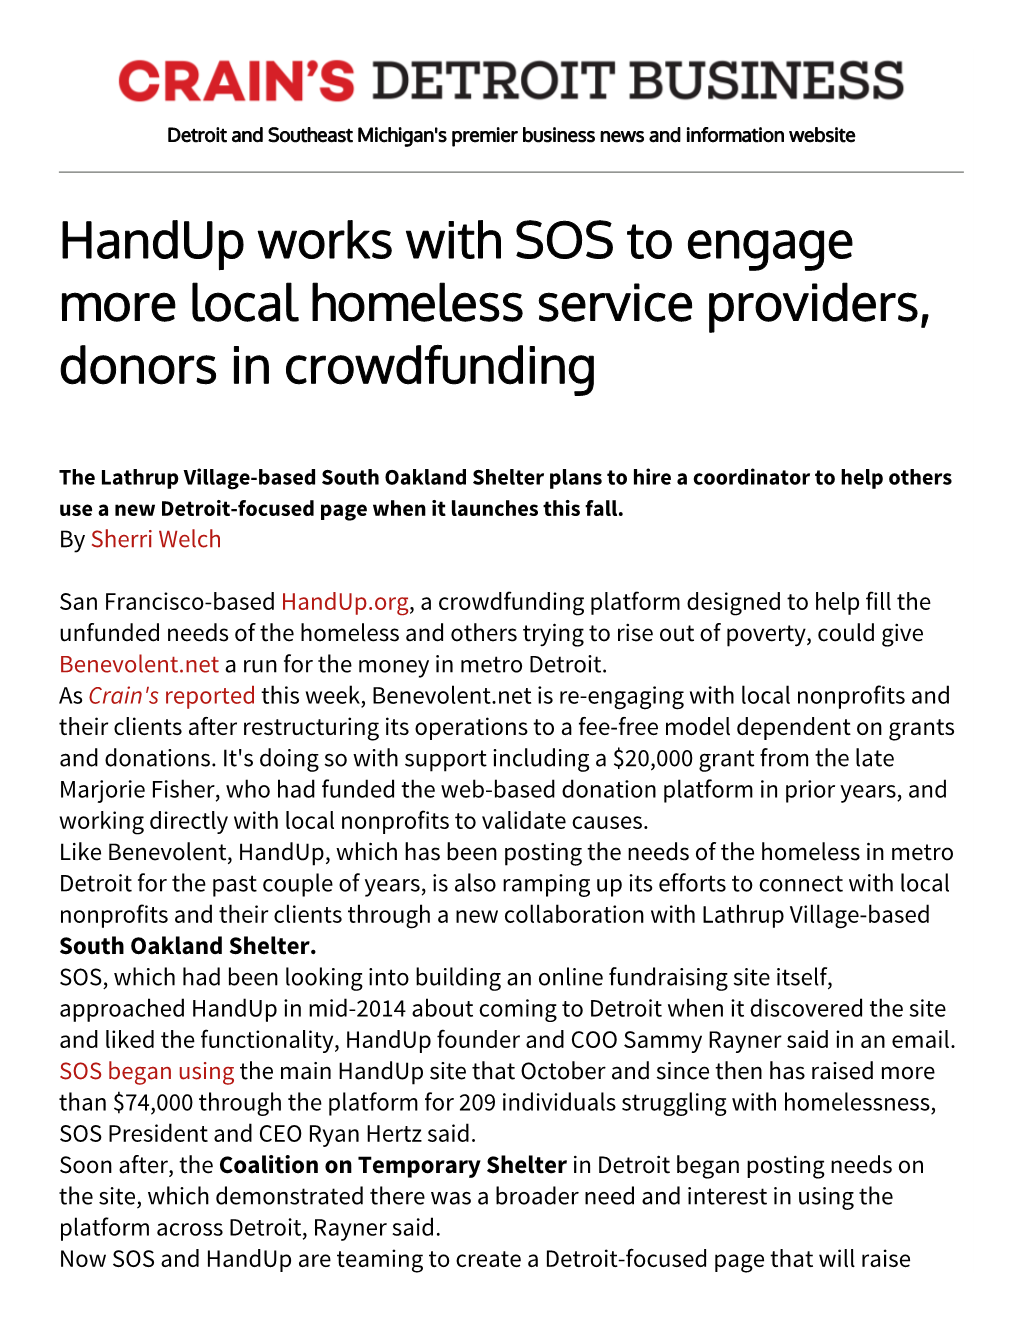 Handup Works with SOS to Engage More Local Homeless Service Providers, Donors in Crowdfunding